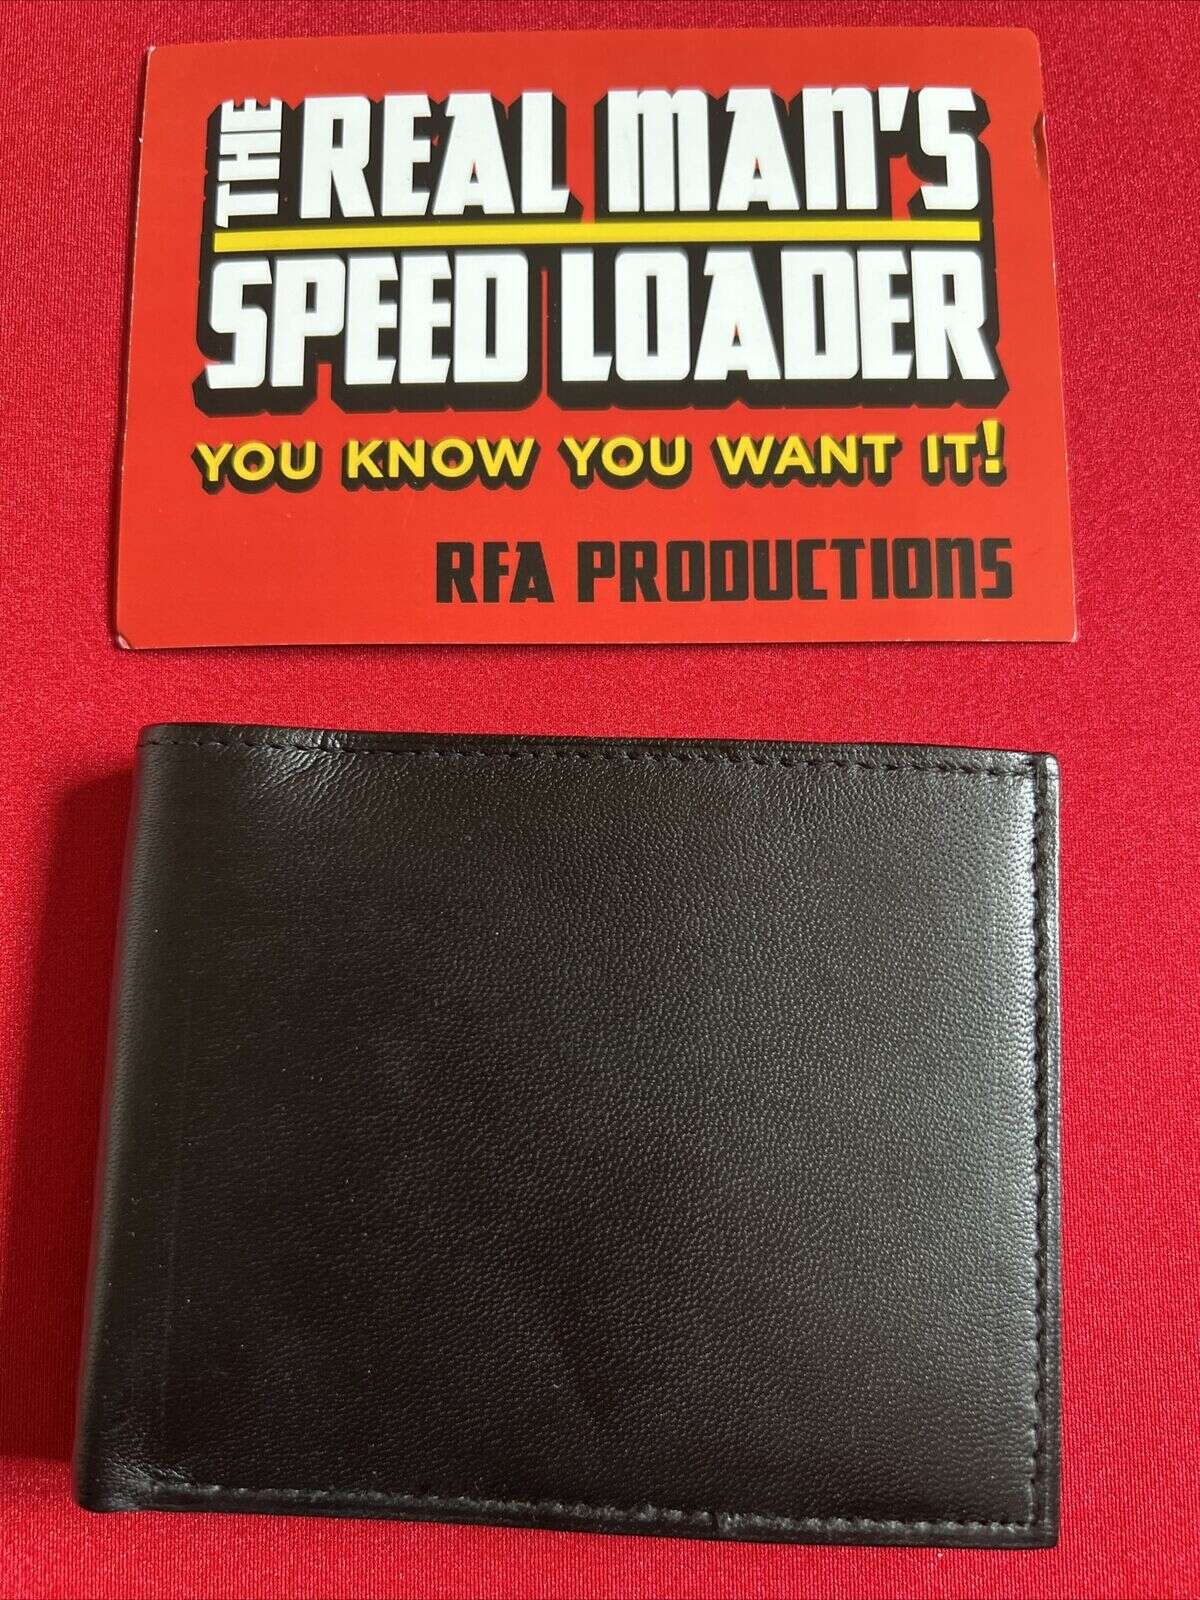 The Real Man’s Speedloader by RFA Productions shown closed under product packaging on red background